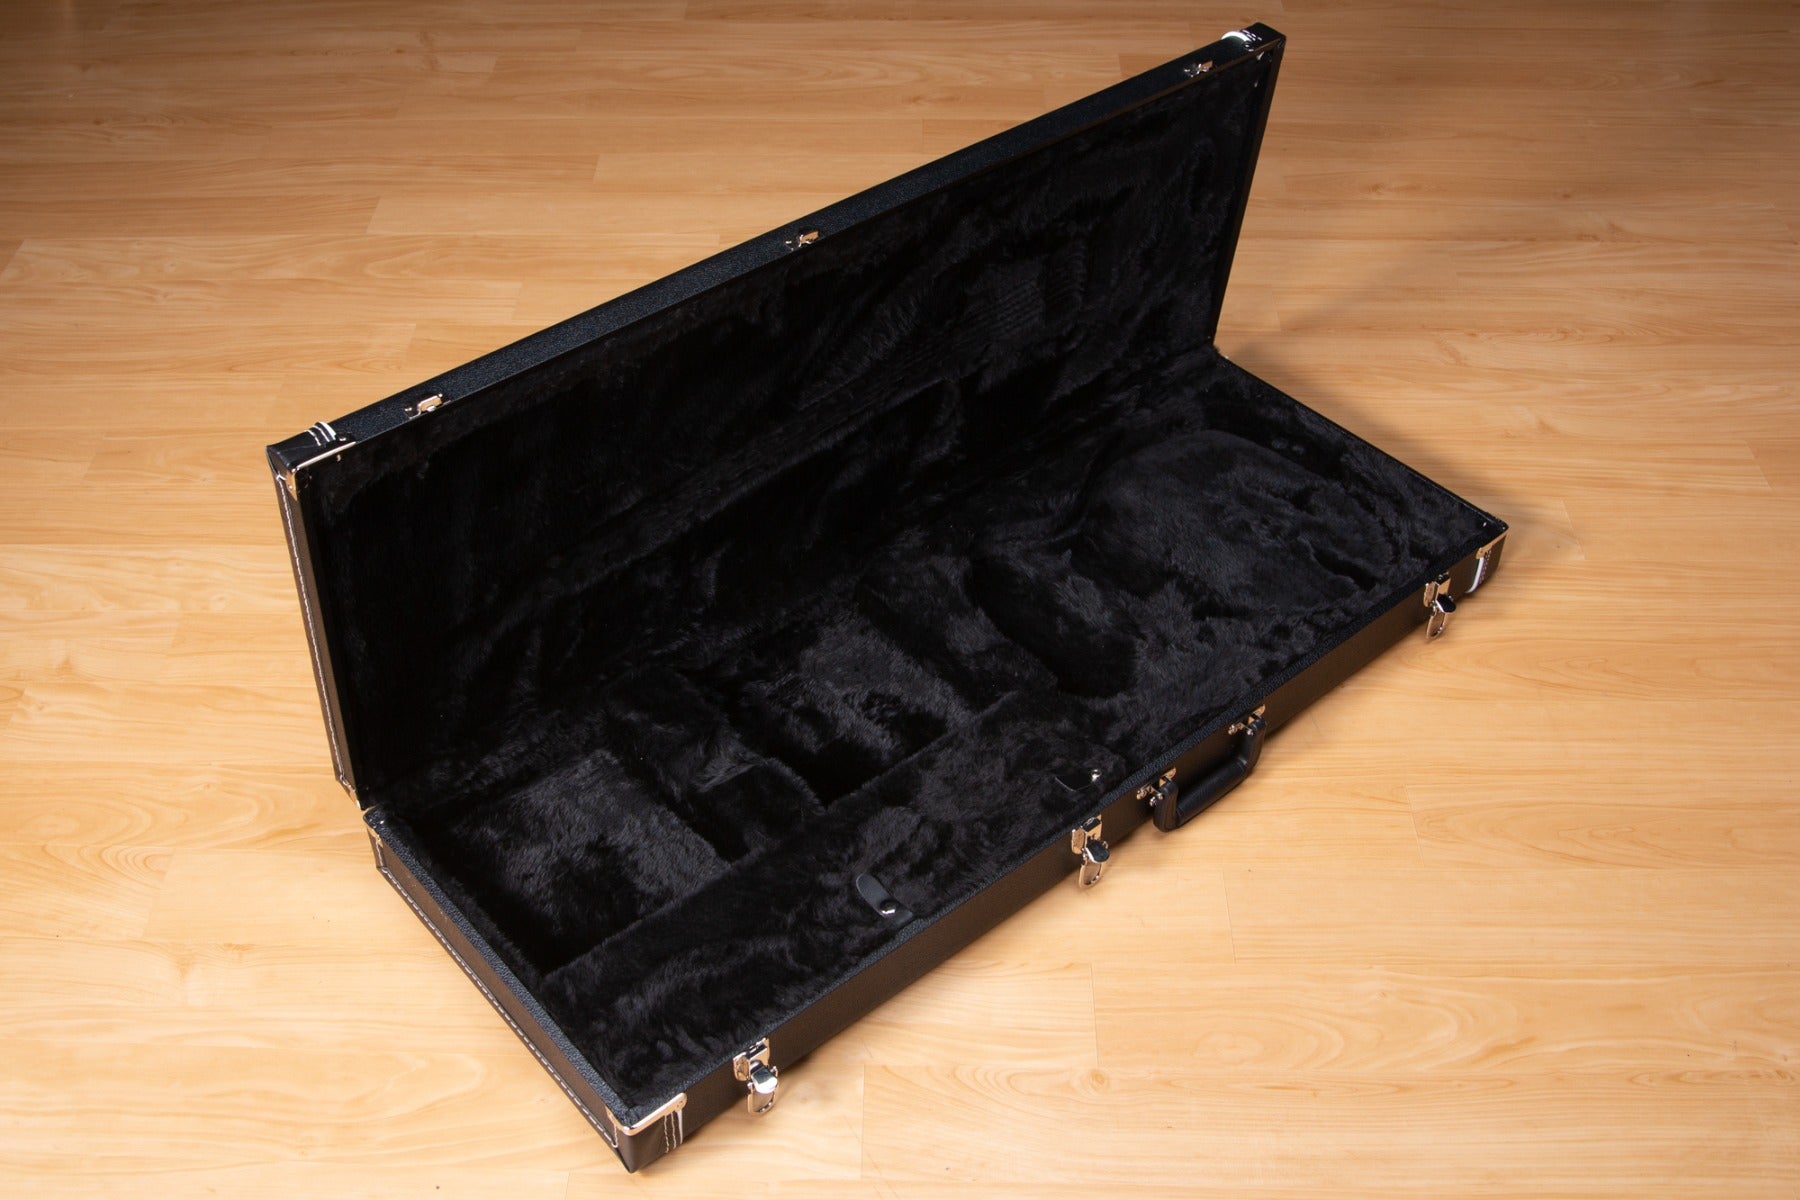 Included guitar case for the PRS Core Paul's Guitar - Charcoal Burst view 2